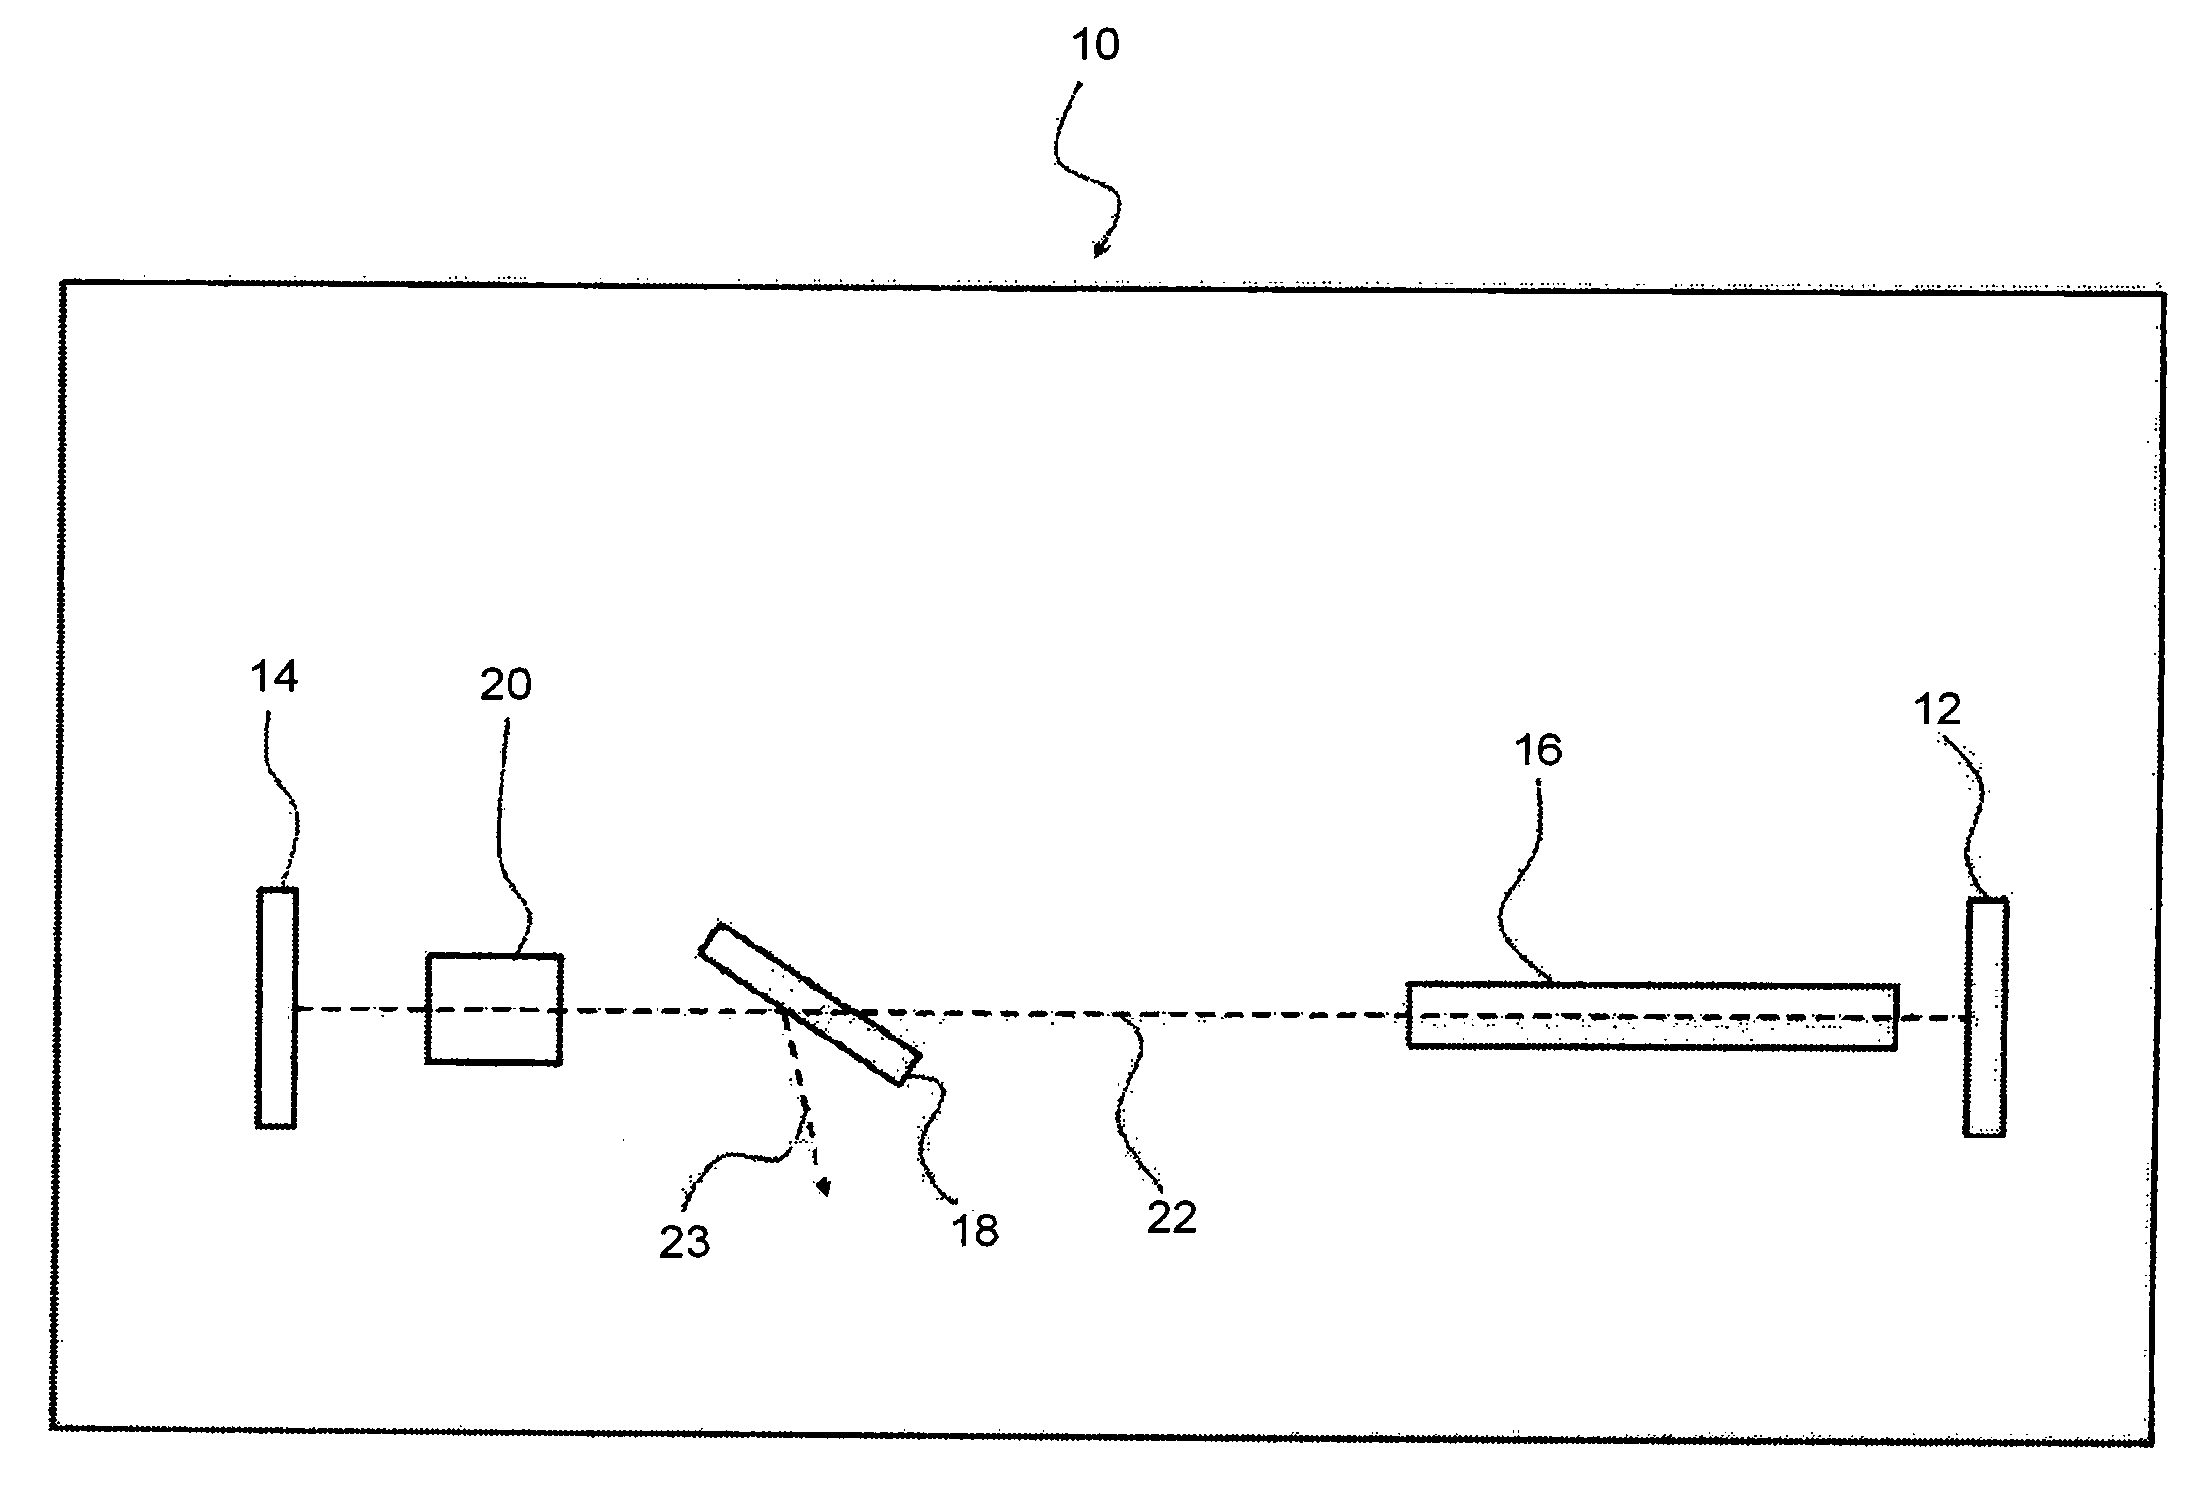 Picosecond Laser Apparatus and Methods for its Operation and Use